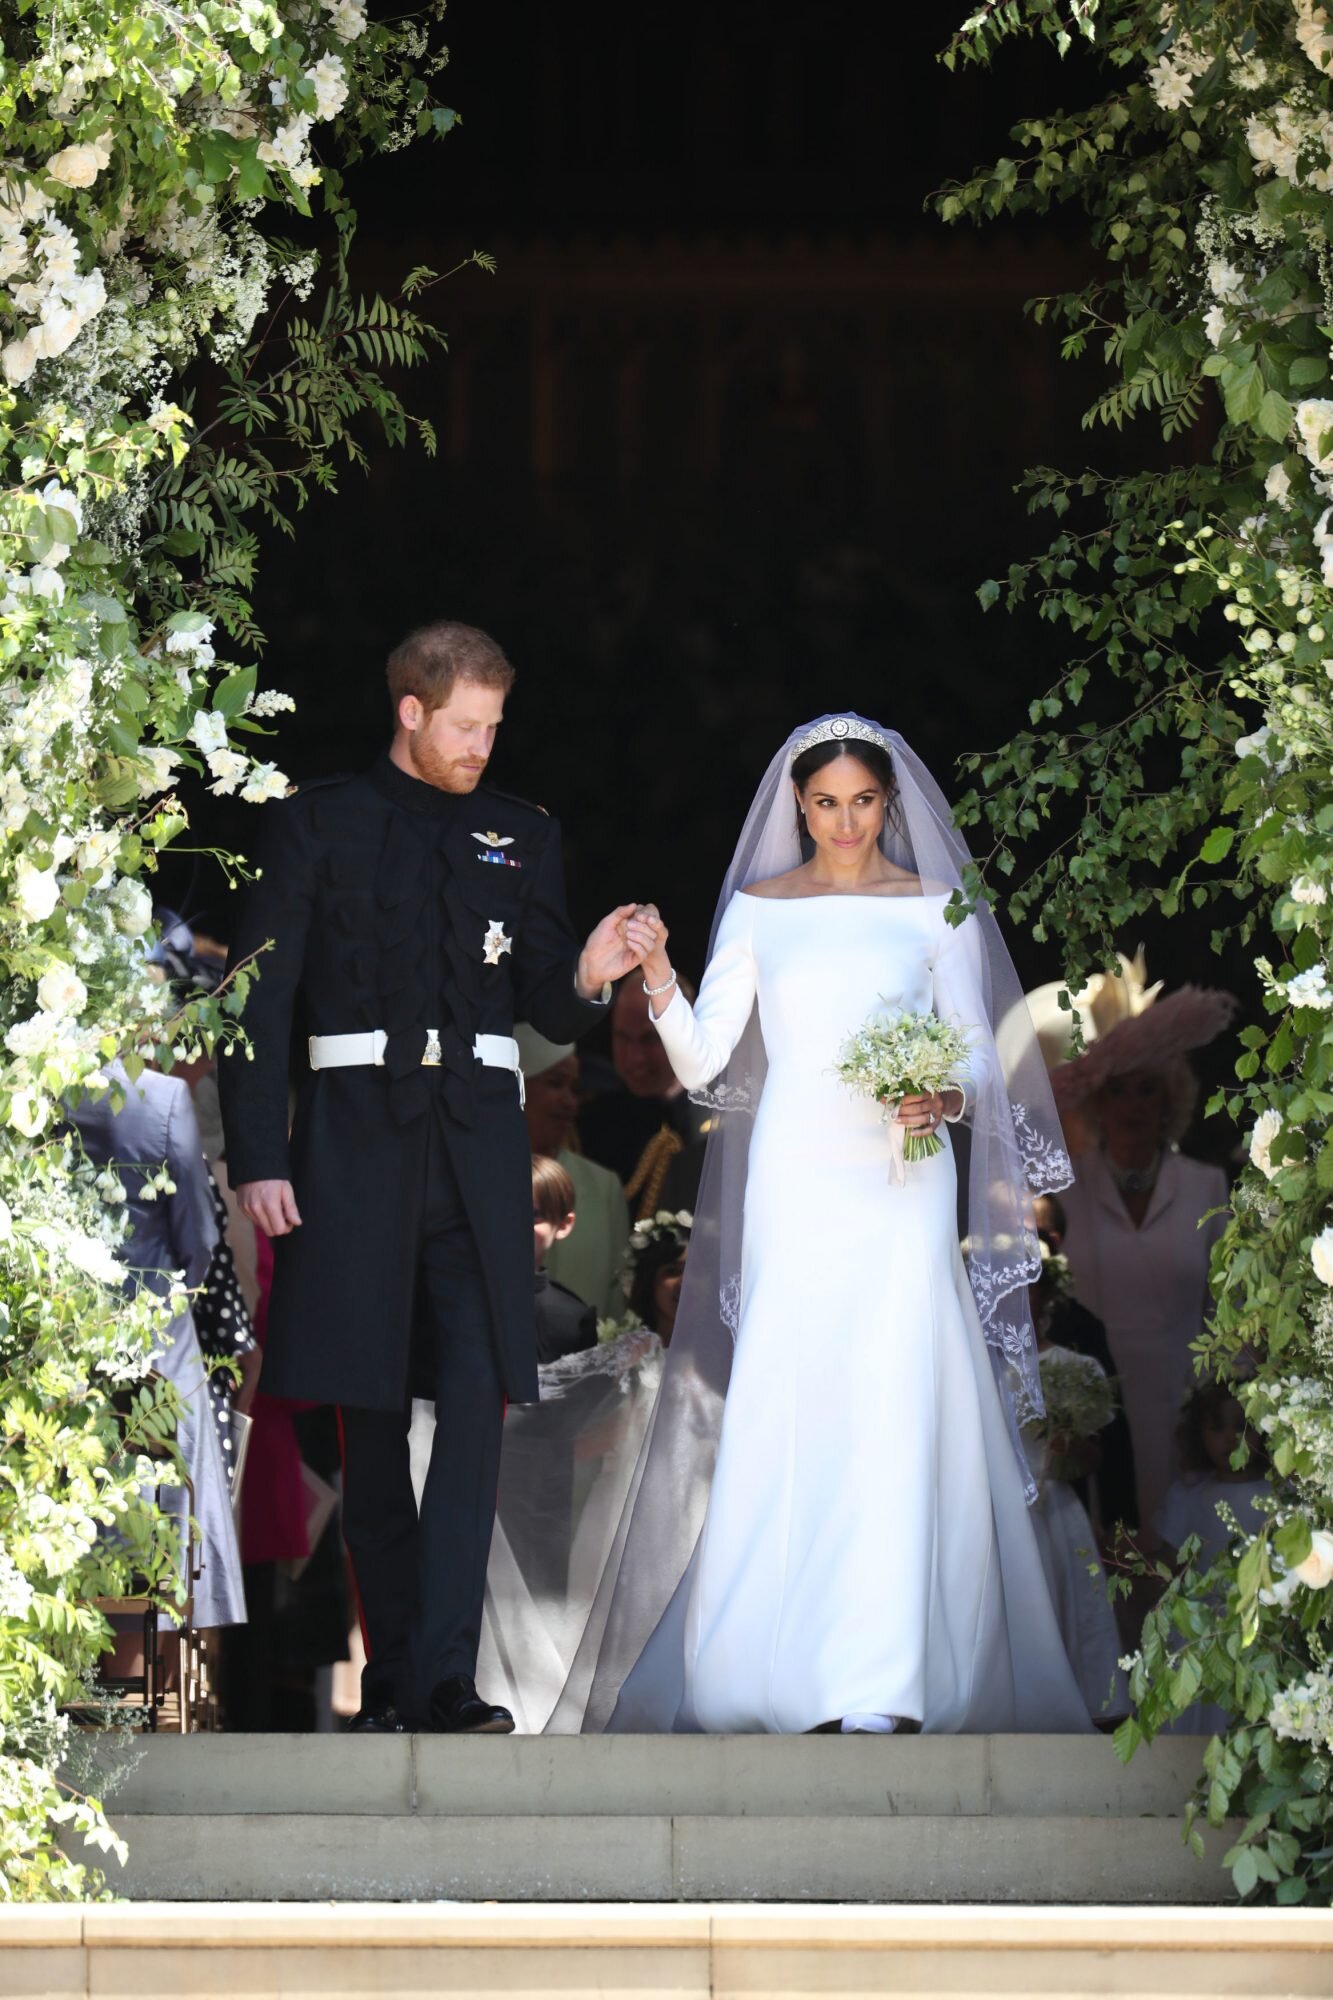 Women's History Month: Celebrity Wedding Looks for Less